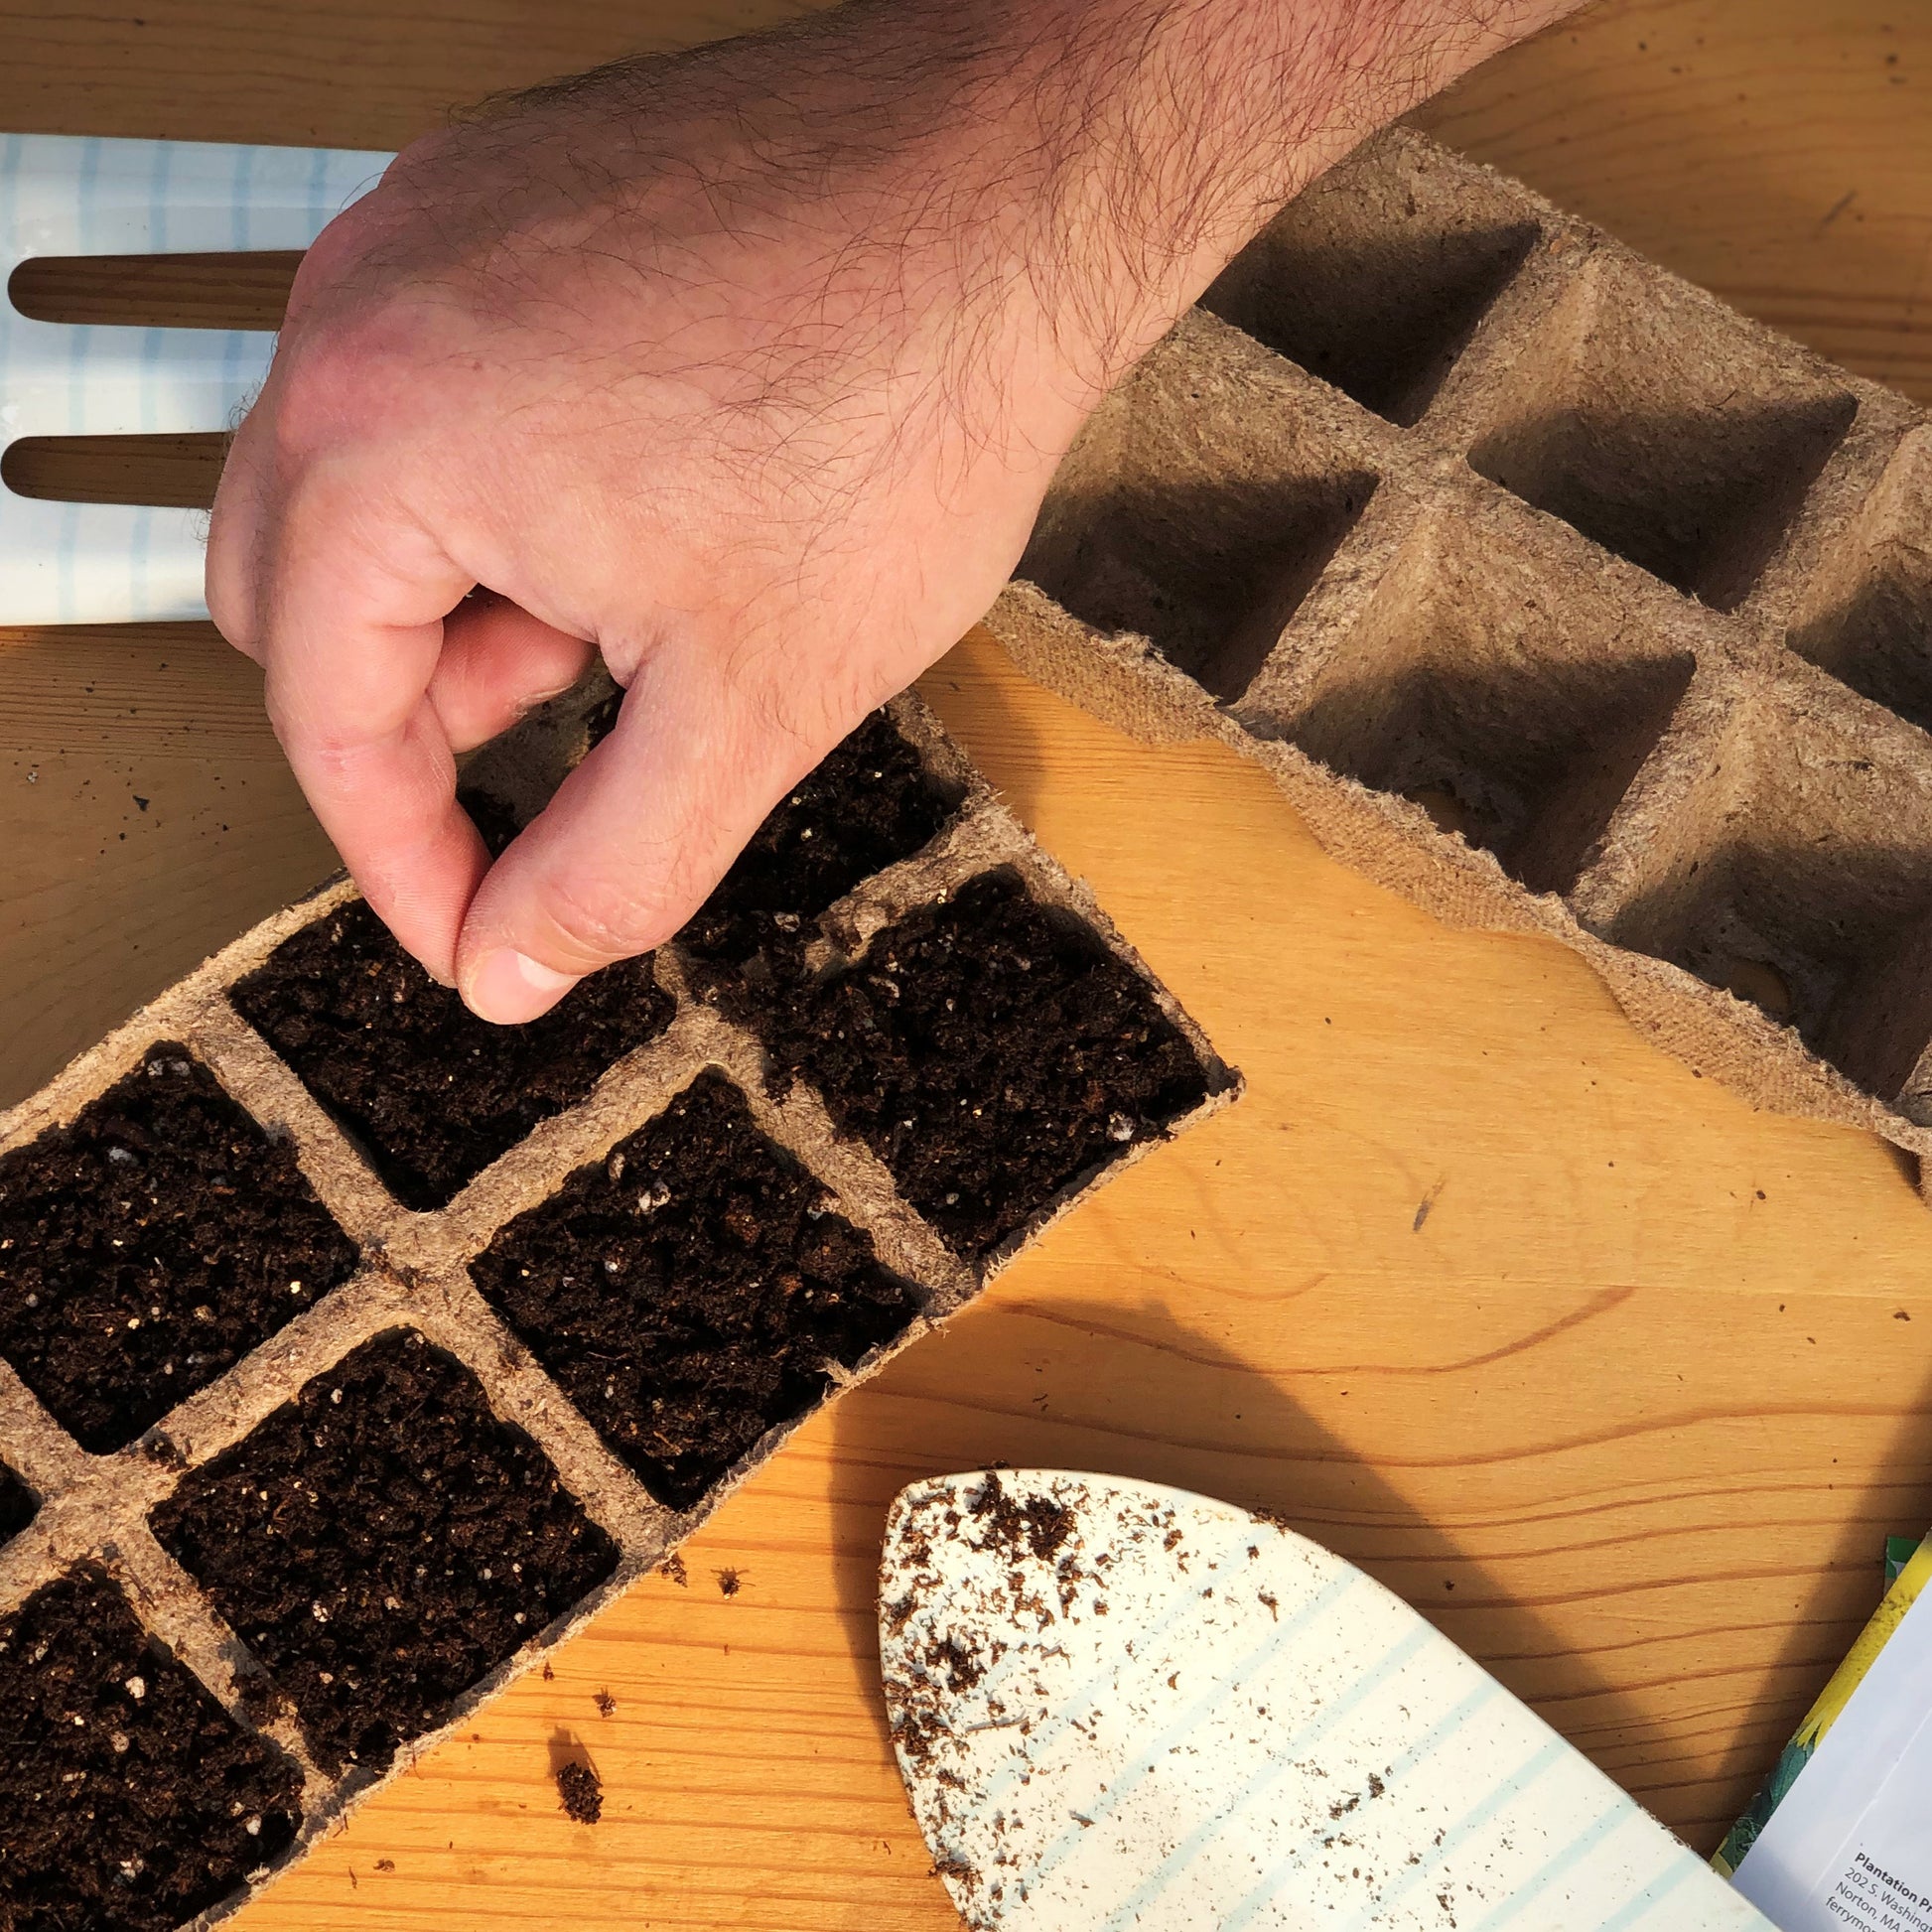 Plant your Better Boy Hybrid Tomato seeds into Jiffy peat strip trays filled with seed starting mix.